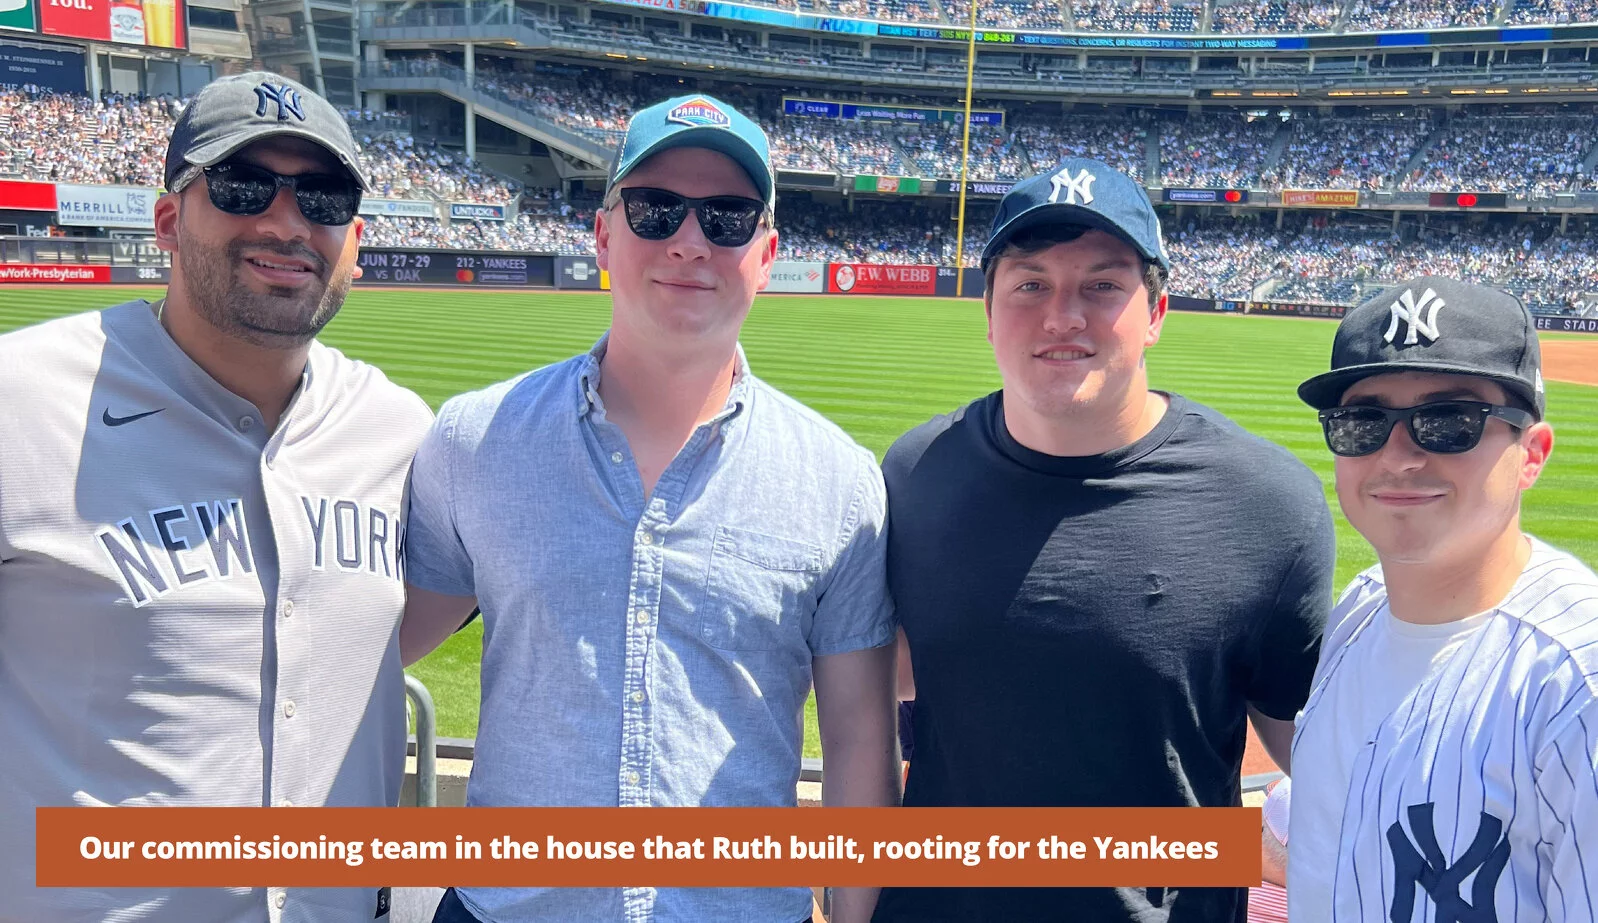  2022/06/Join-Us-Team-Photography_CX-Team-at-Yankees-Game.jpg 